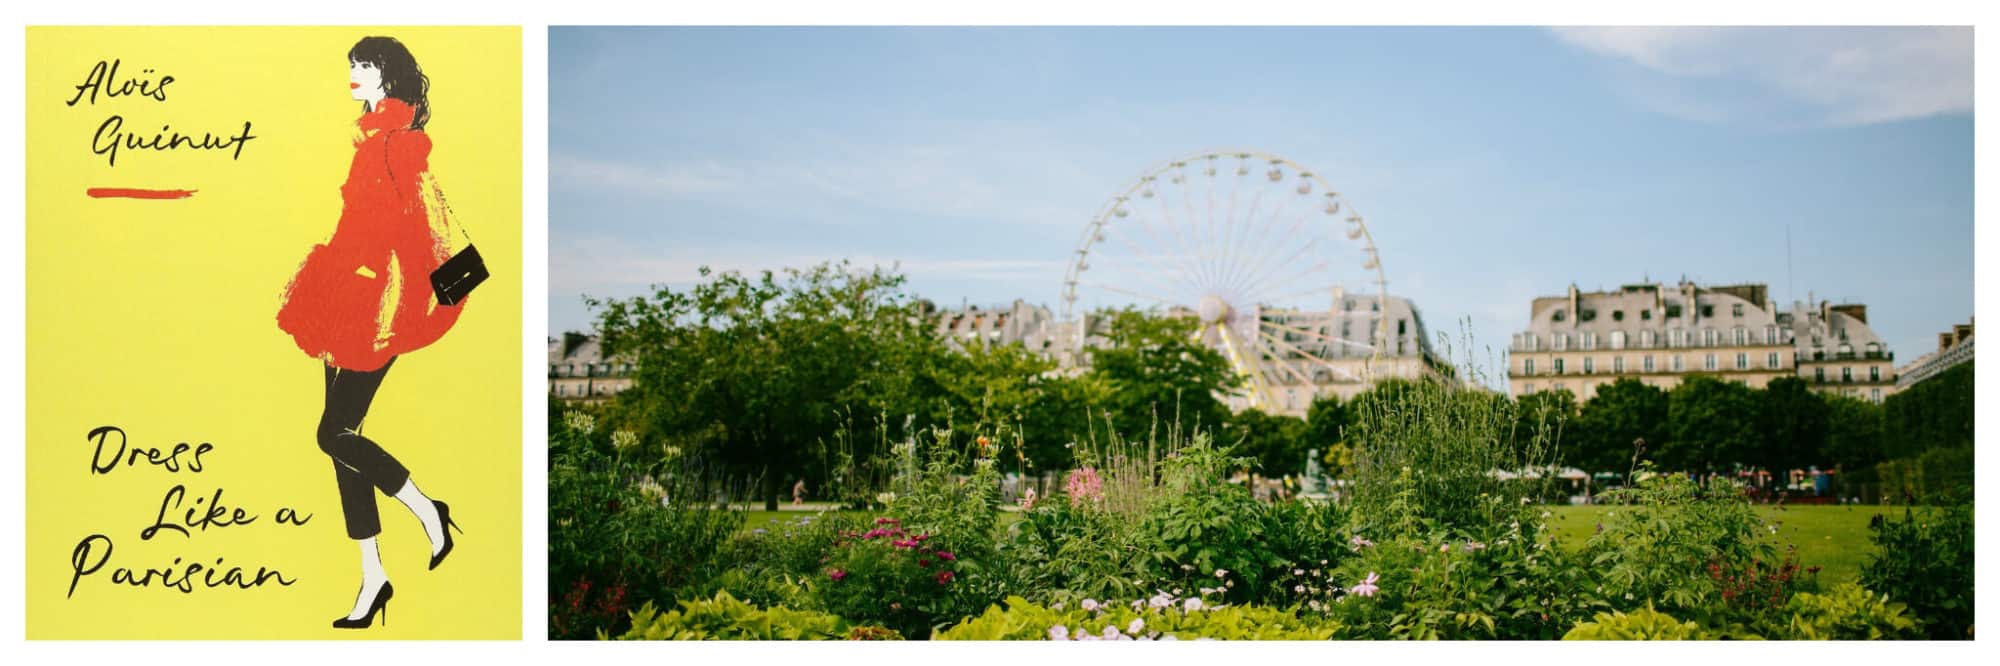 Right: A bright, sunny day in Paris where the green Jardin de Tuileries is visible in the forefront and a ferris wheel and apartments are visible in the background.